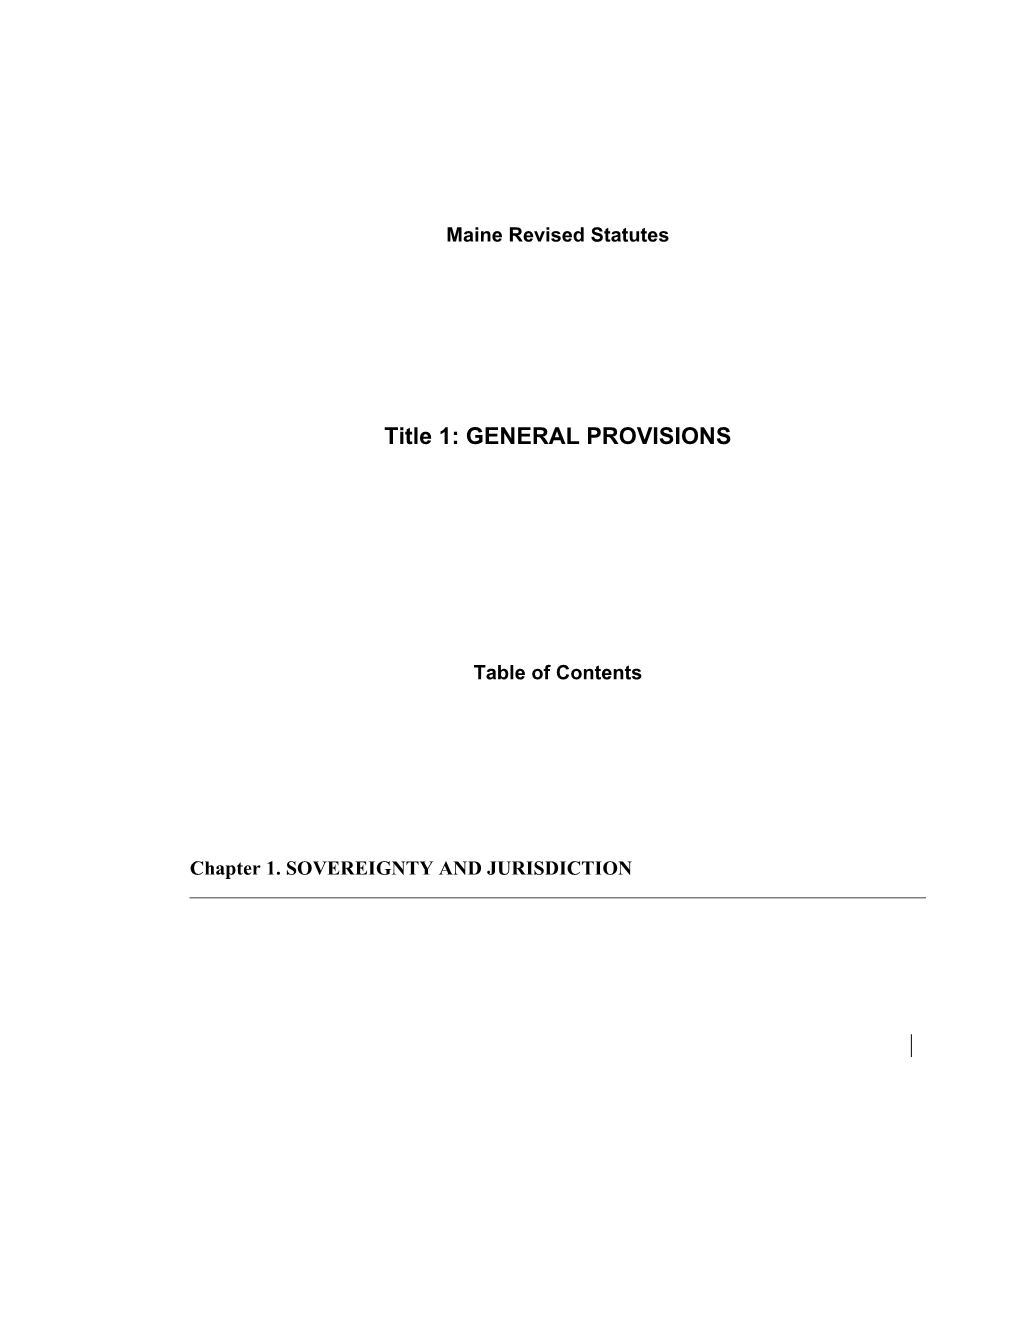 MRS Title 1: GENERAL PROVISIONS